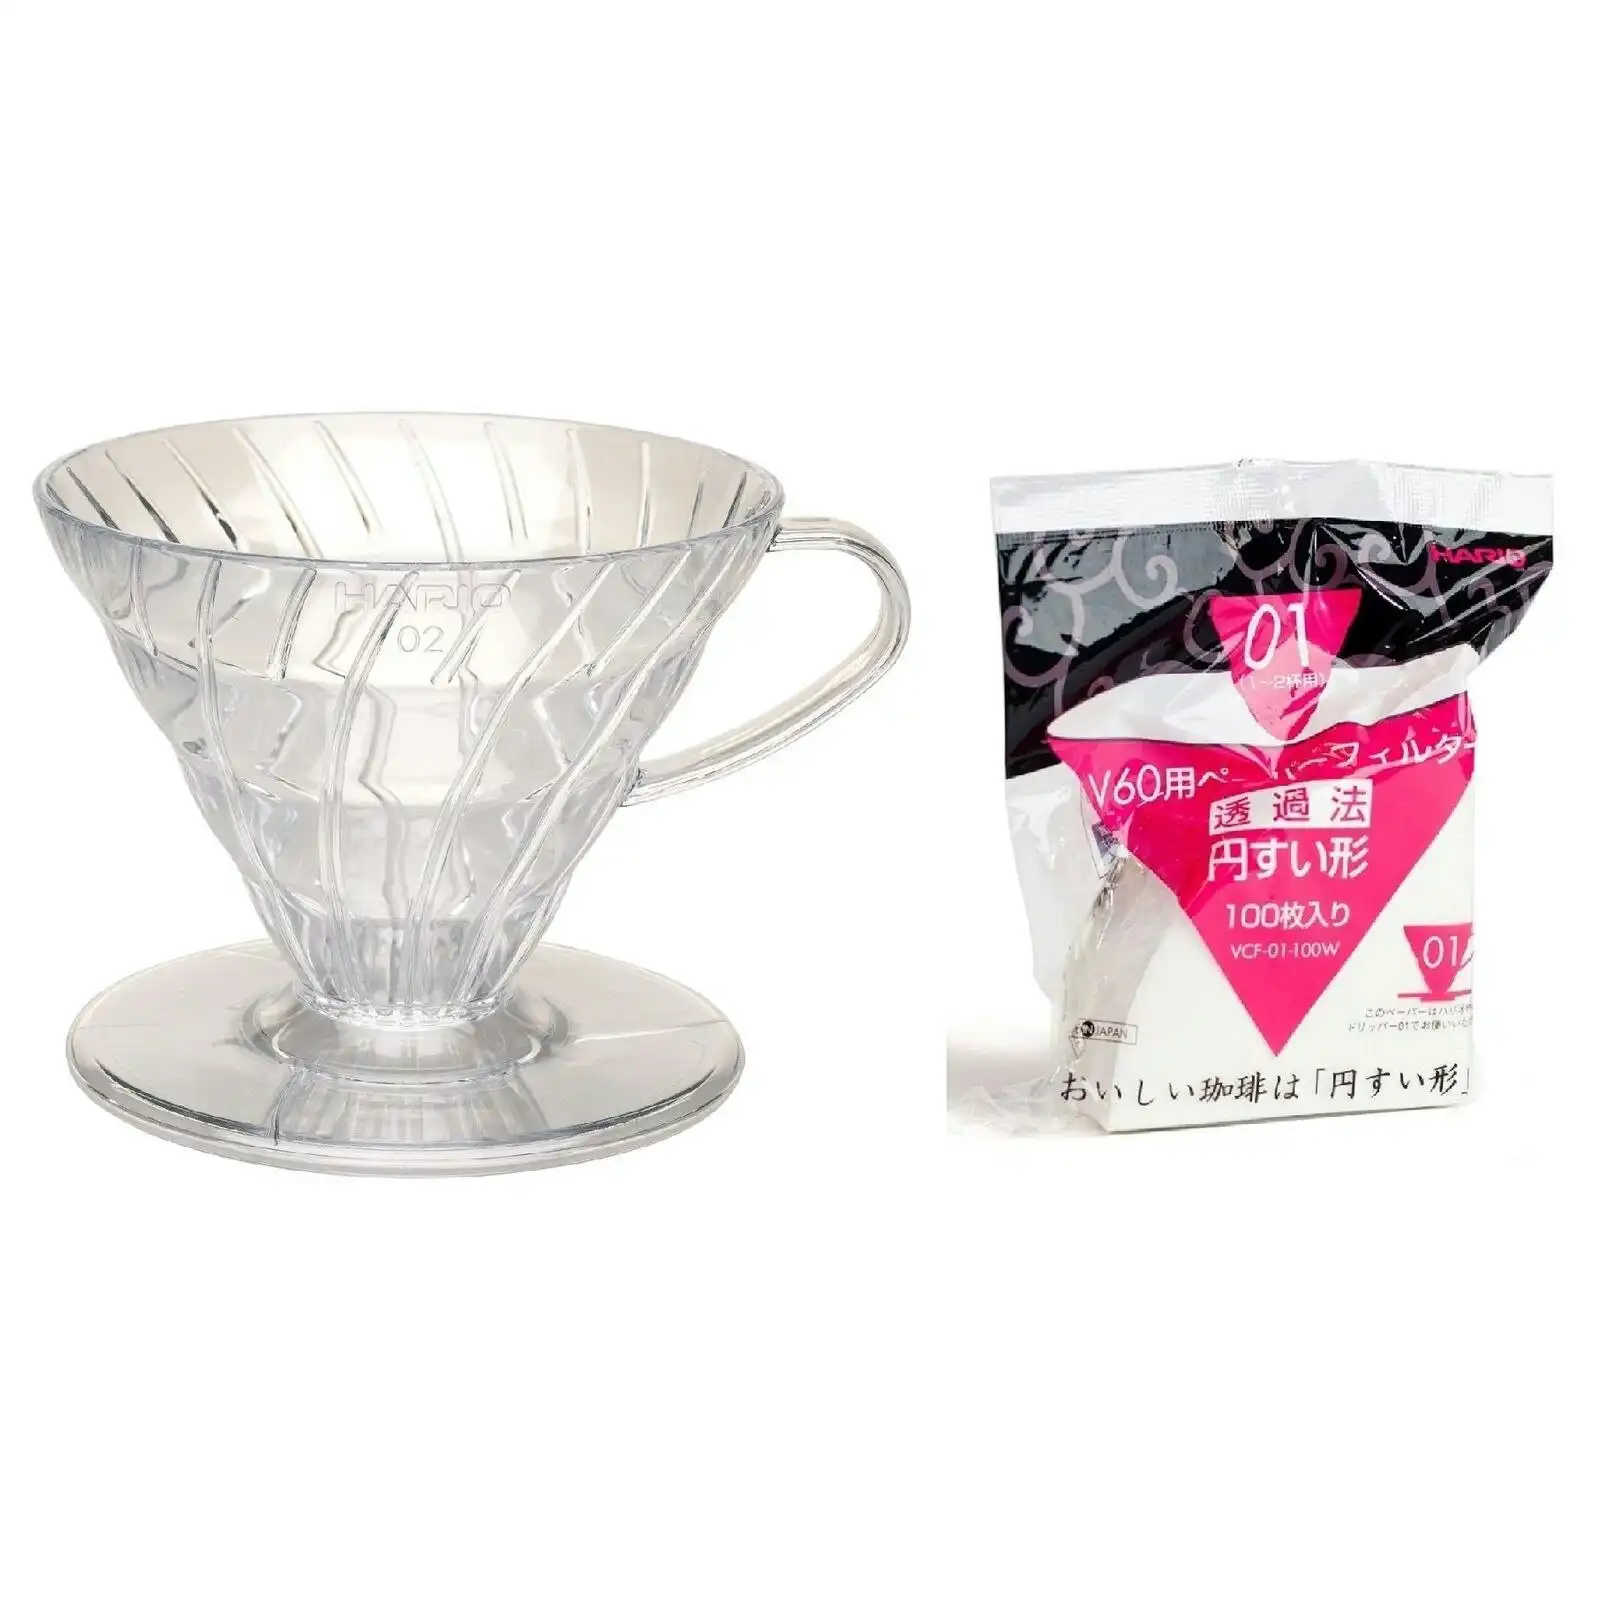 Hario V60   01 Plastic Coffee Dripper With 100 Filter Papers